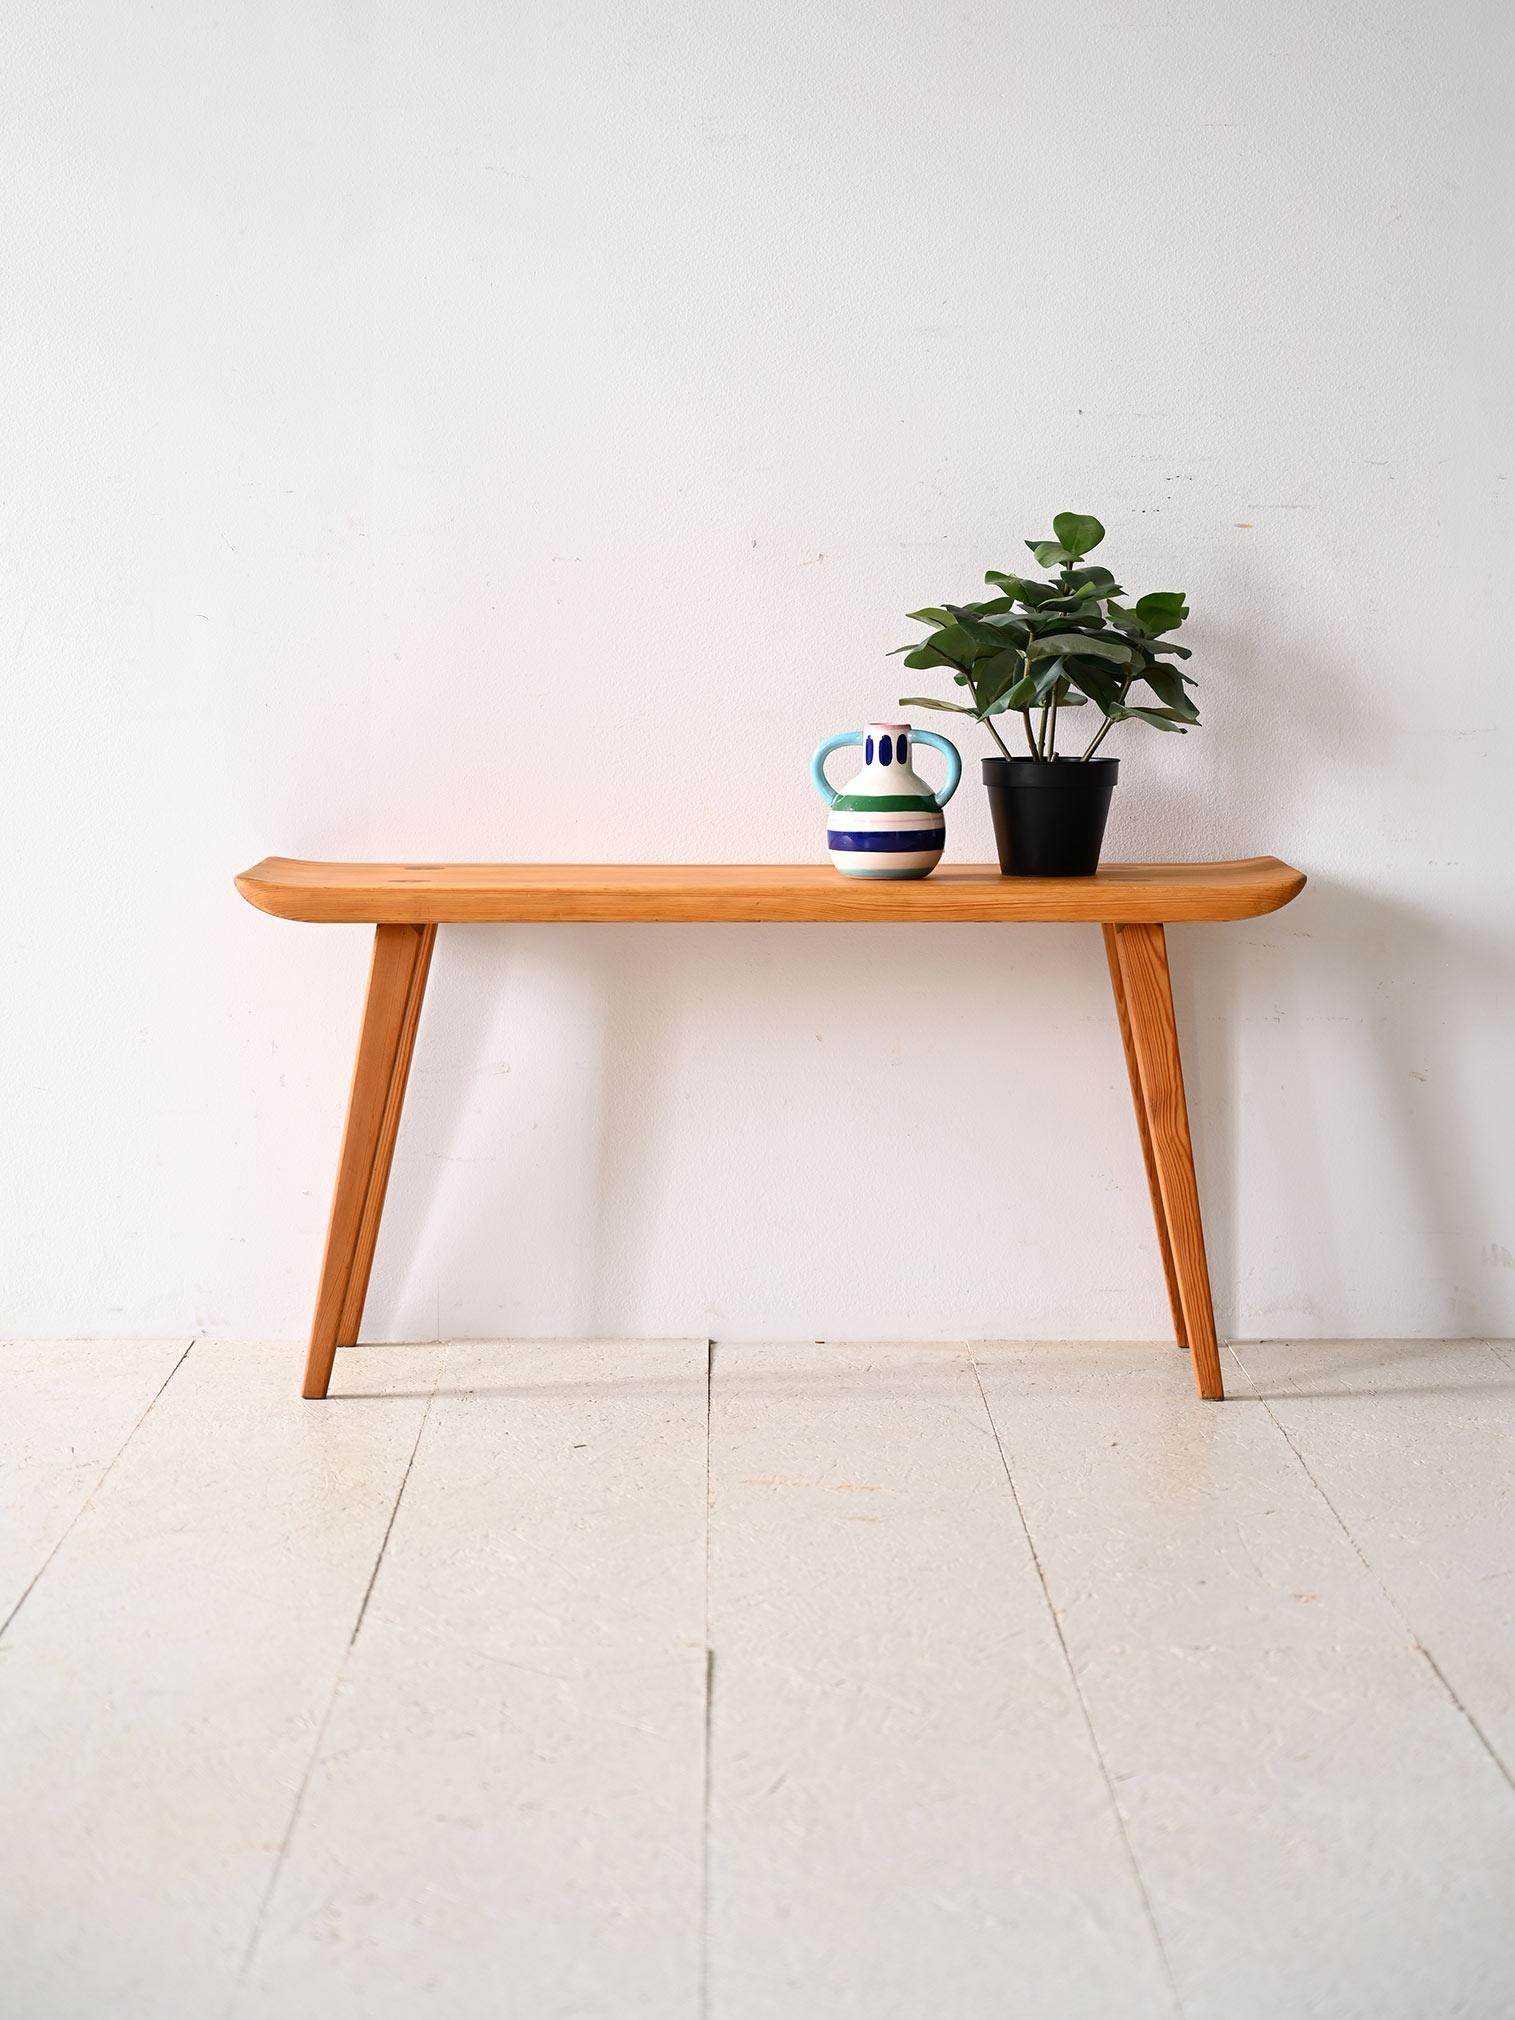 Swedish vintage wooden bench by Carl Malmsten for Svensk Fur.

This furniture model traces the modern rustic style typical of Scandinavian homes in the 1960s. 
Made of pine wood, thanks to its sober lines and refined details, it can be used not only